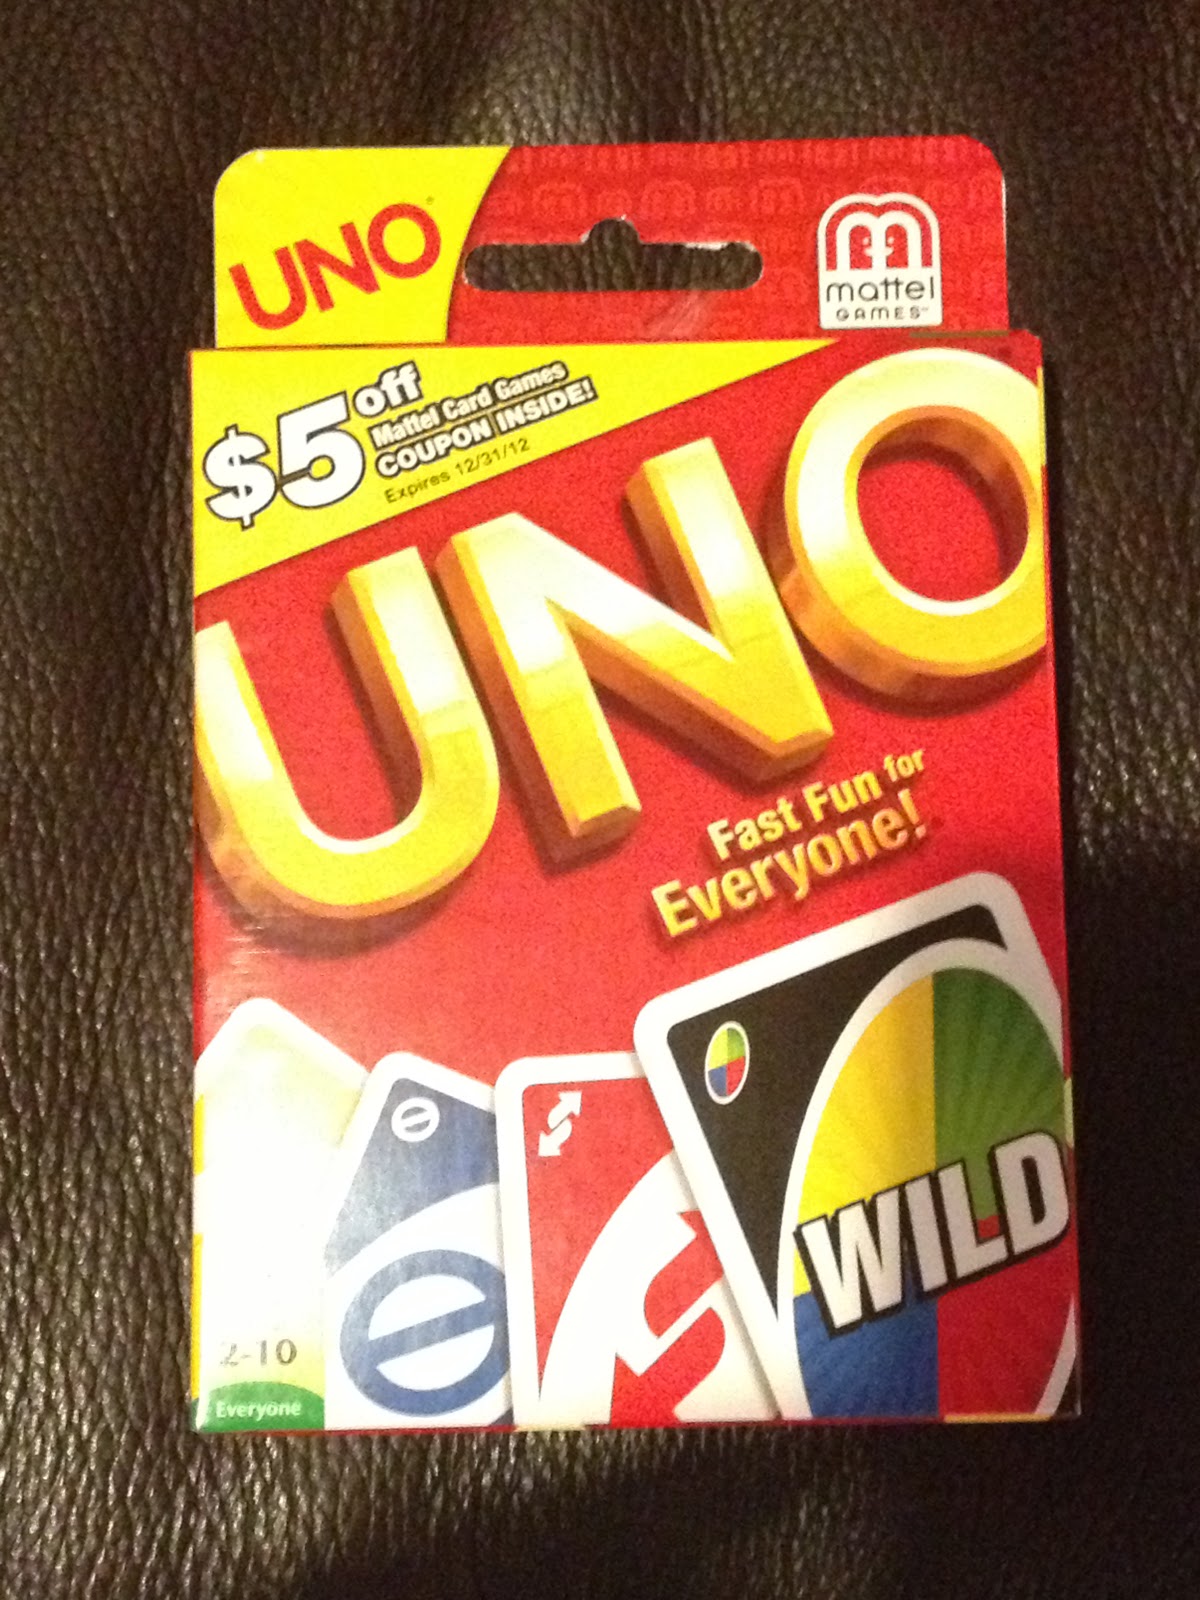 Daddy aves The Bank WOW Free box of UNO Cards at Target 